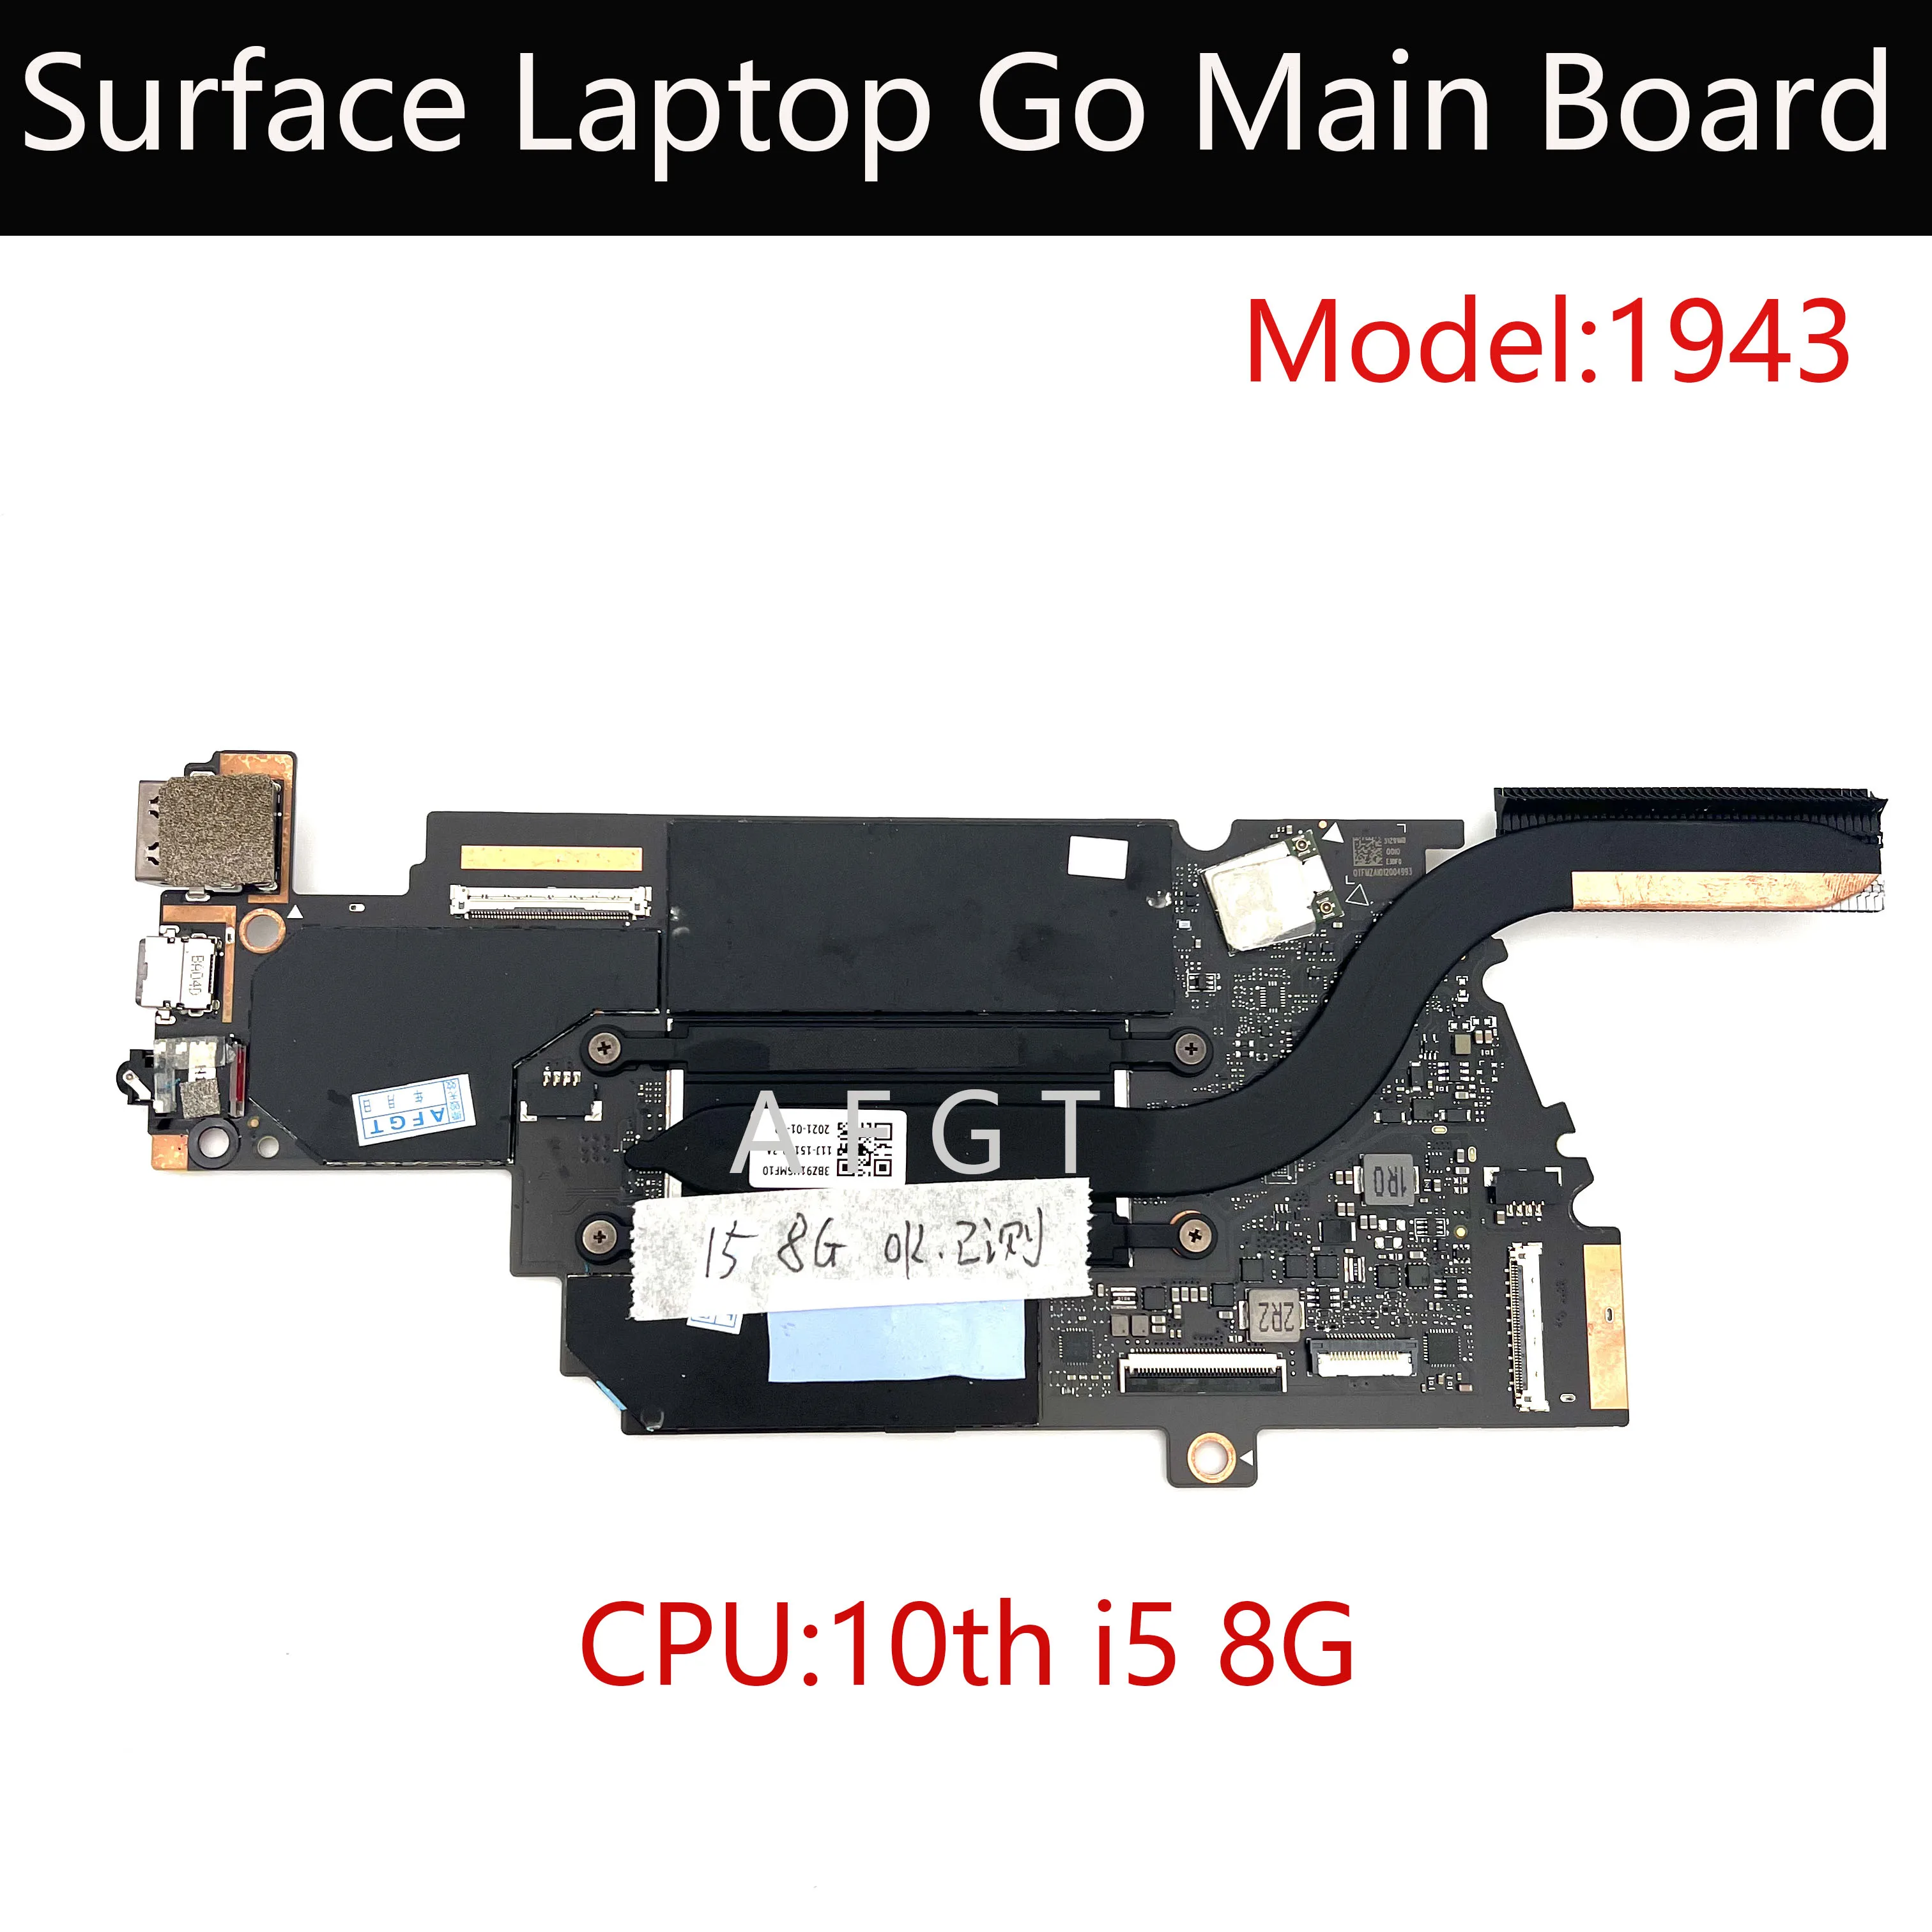 

Original Motherboard For Microsoft Surface laptop Go 1943 GPU I5 8G Logic Board Replacement Tested Well